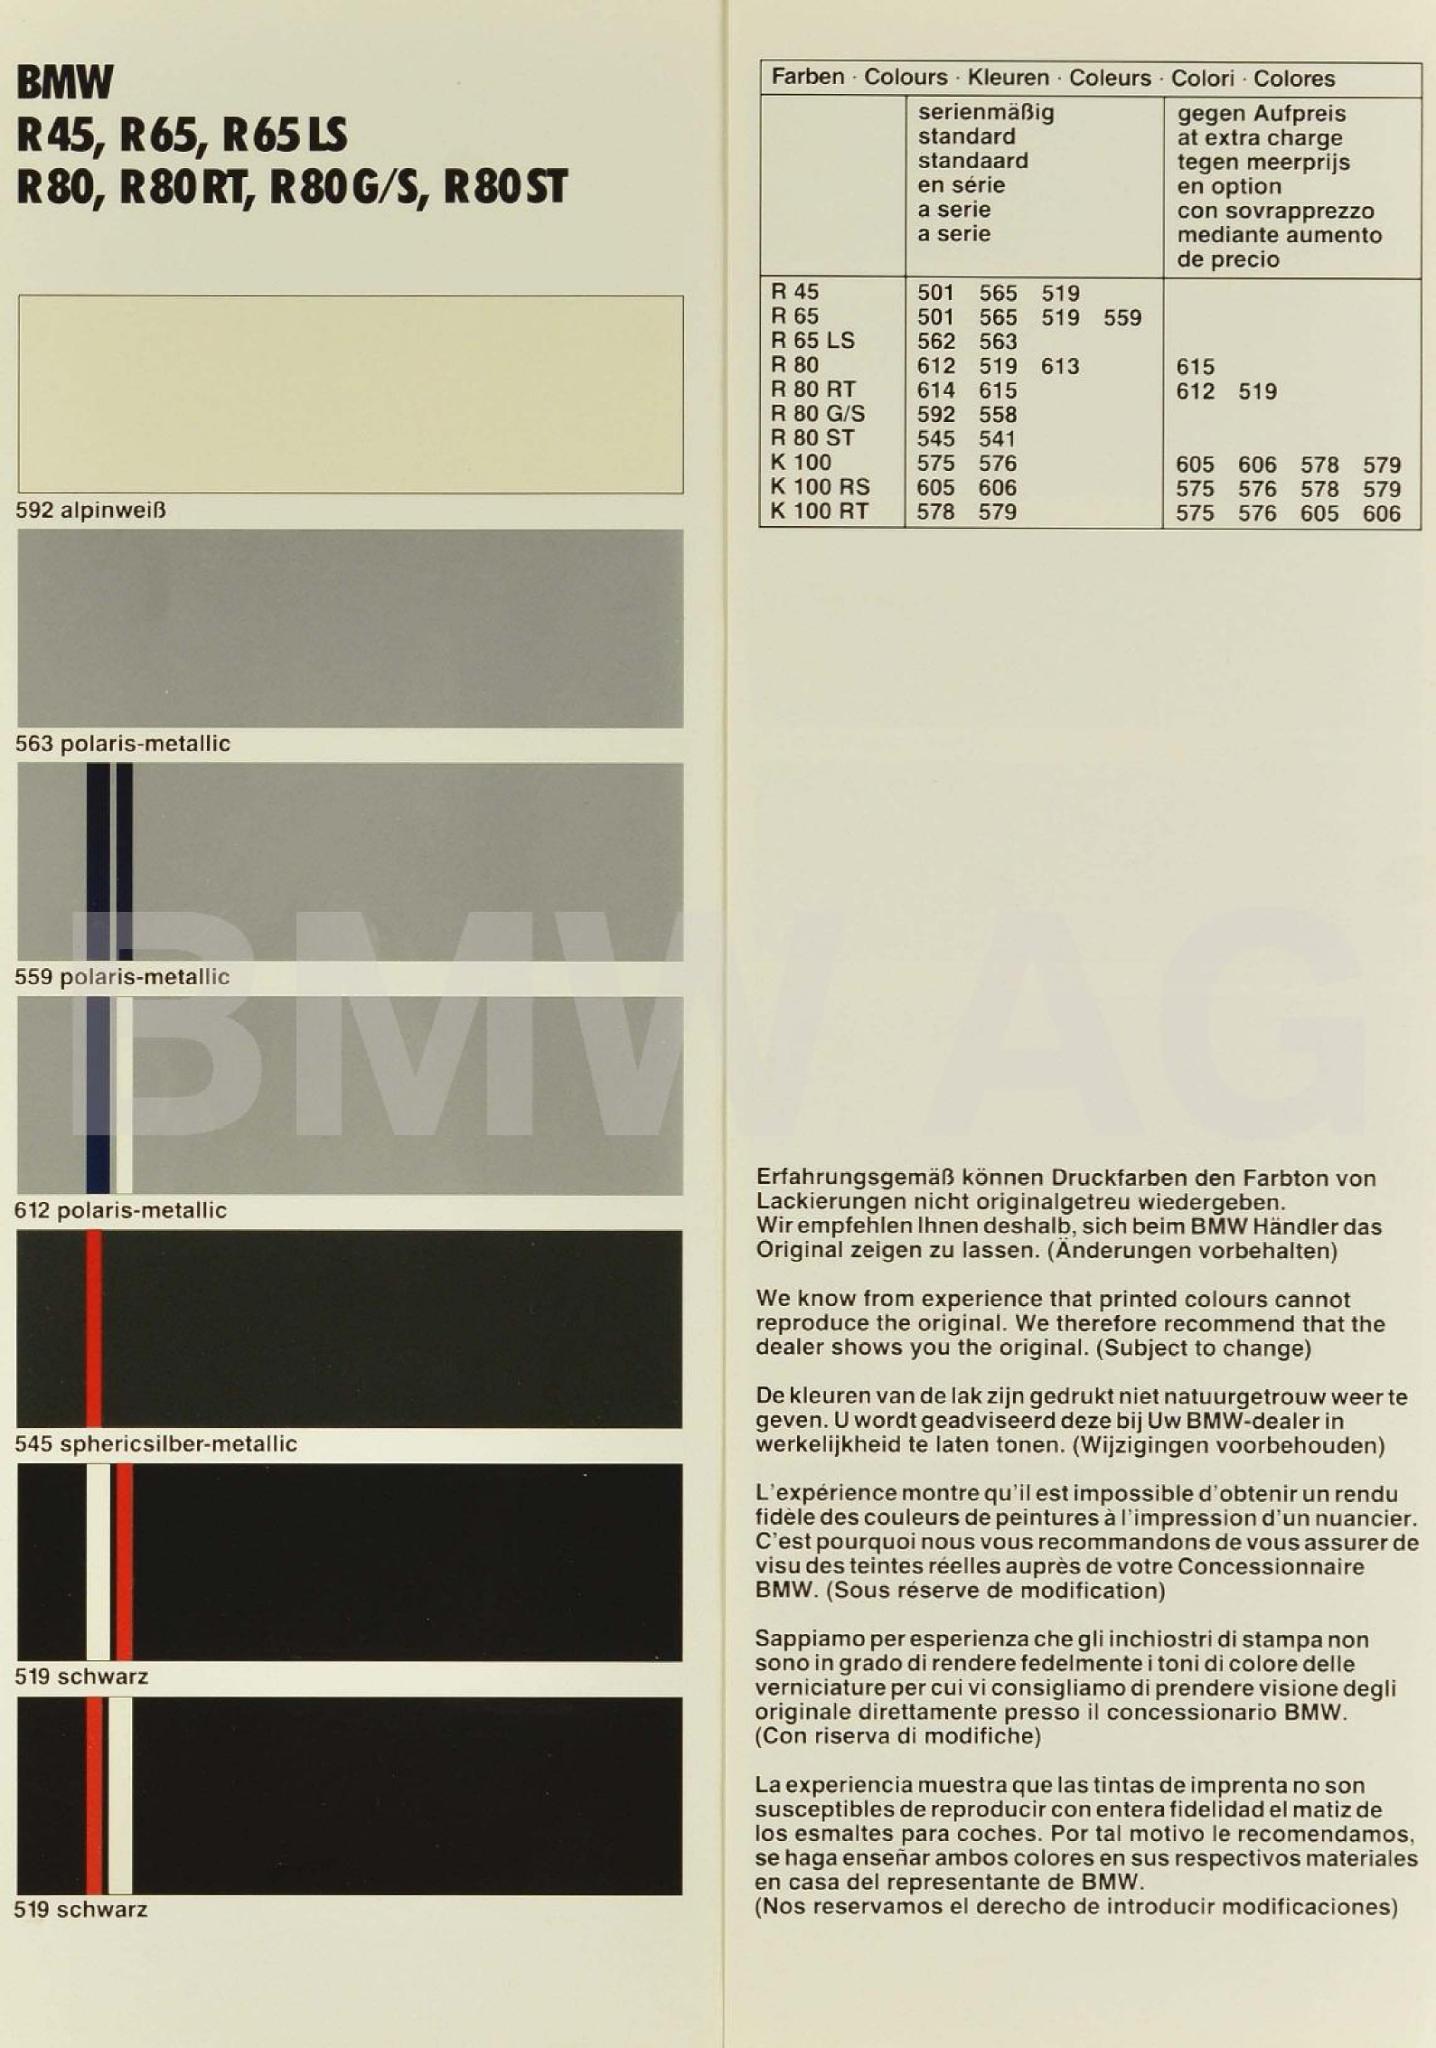 Colors used on BMW Motorcycles in 1984